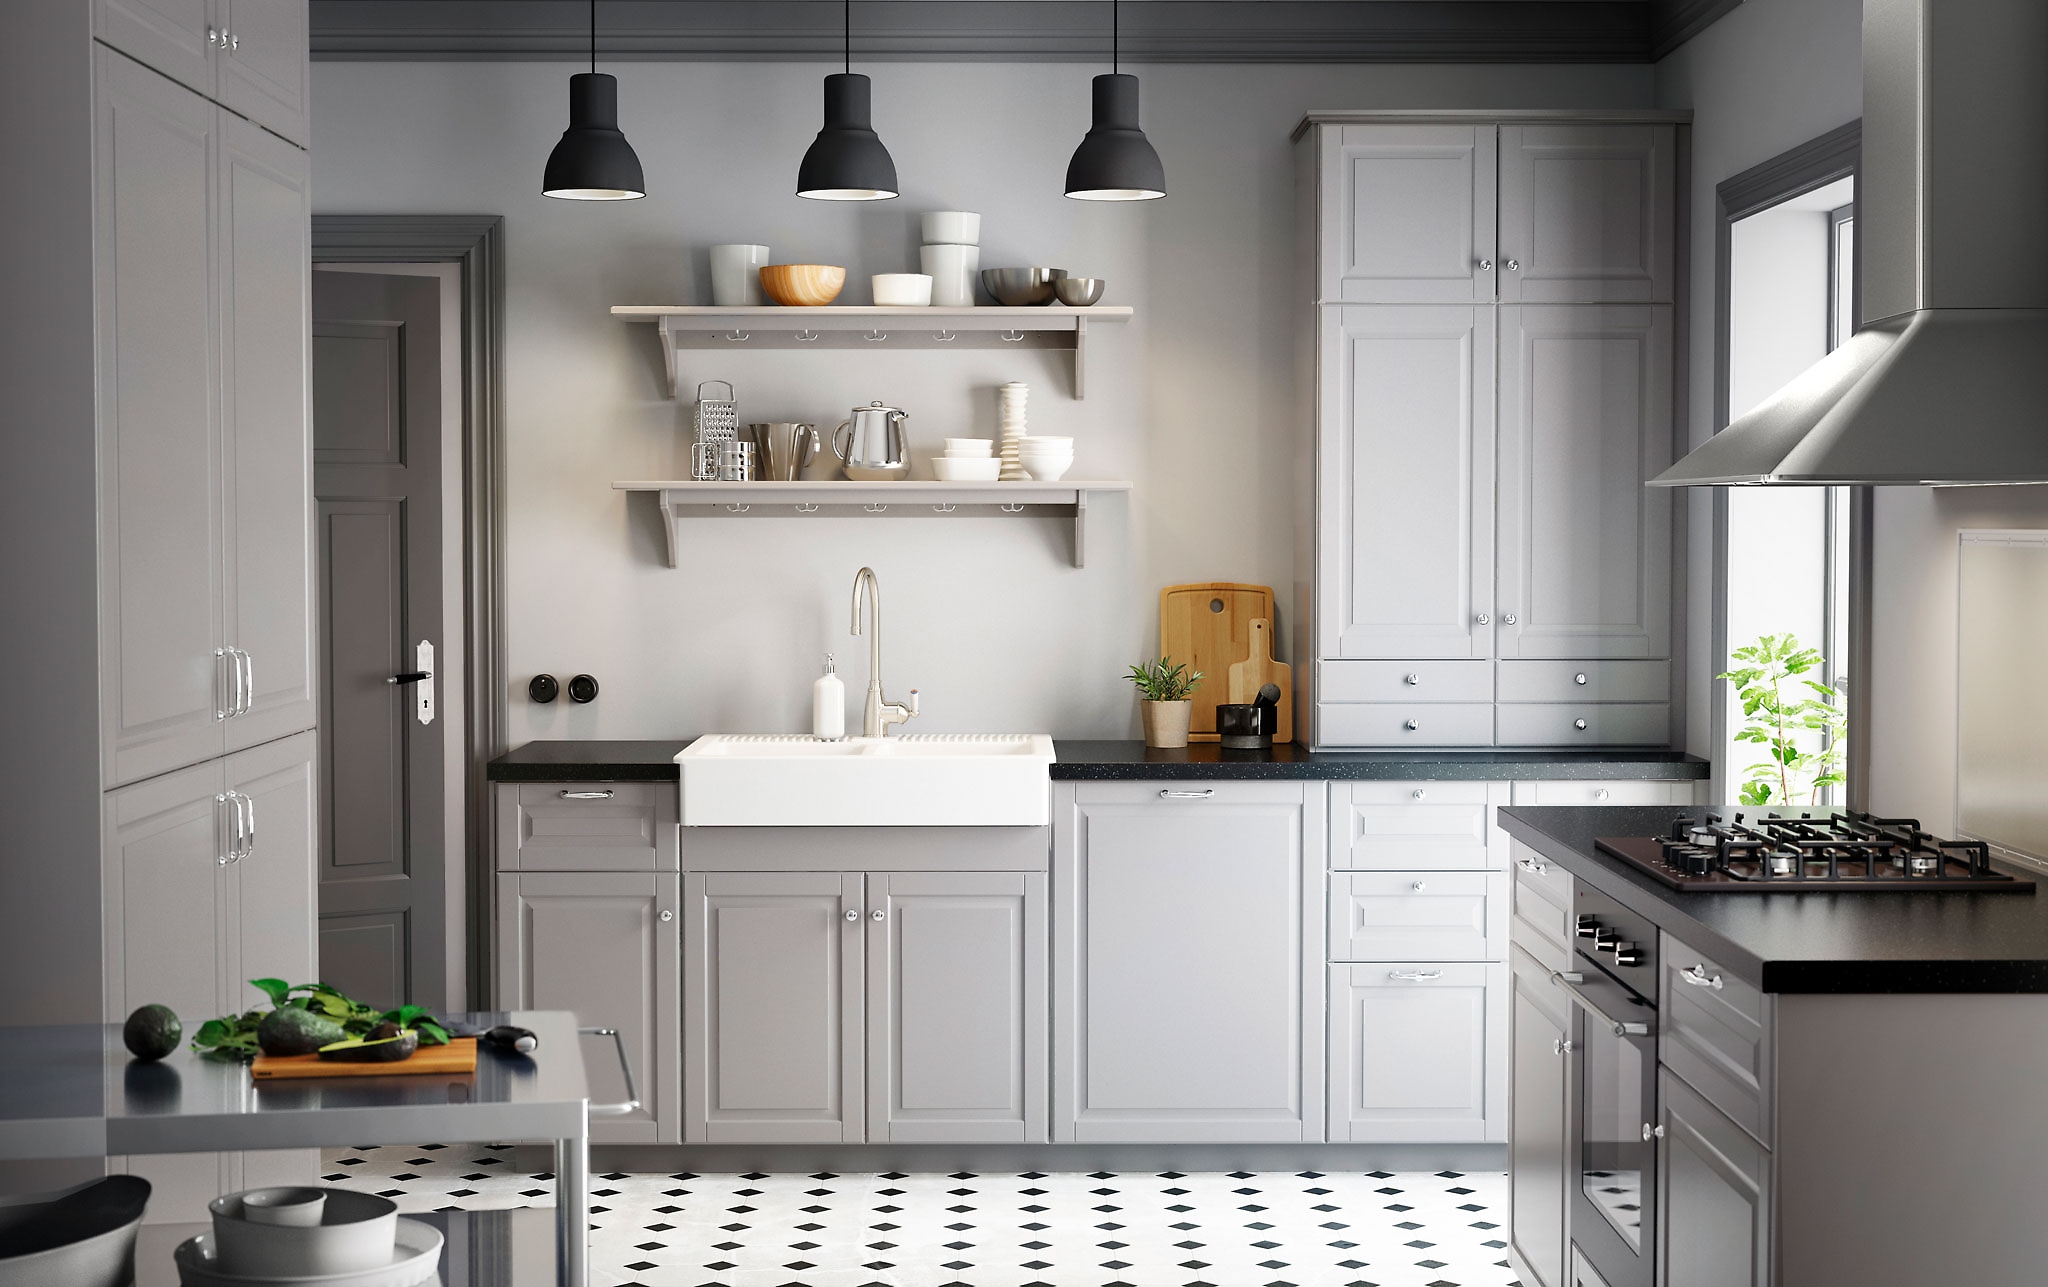 Uk Ikea Kitchen Gallery Styling Up Your Kitchens Ideas Inspiration ...